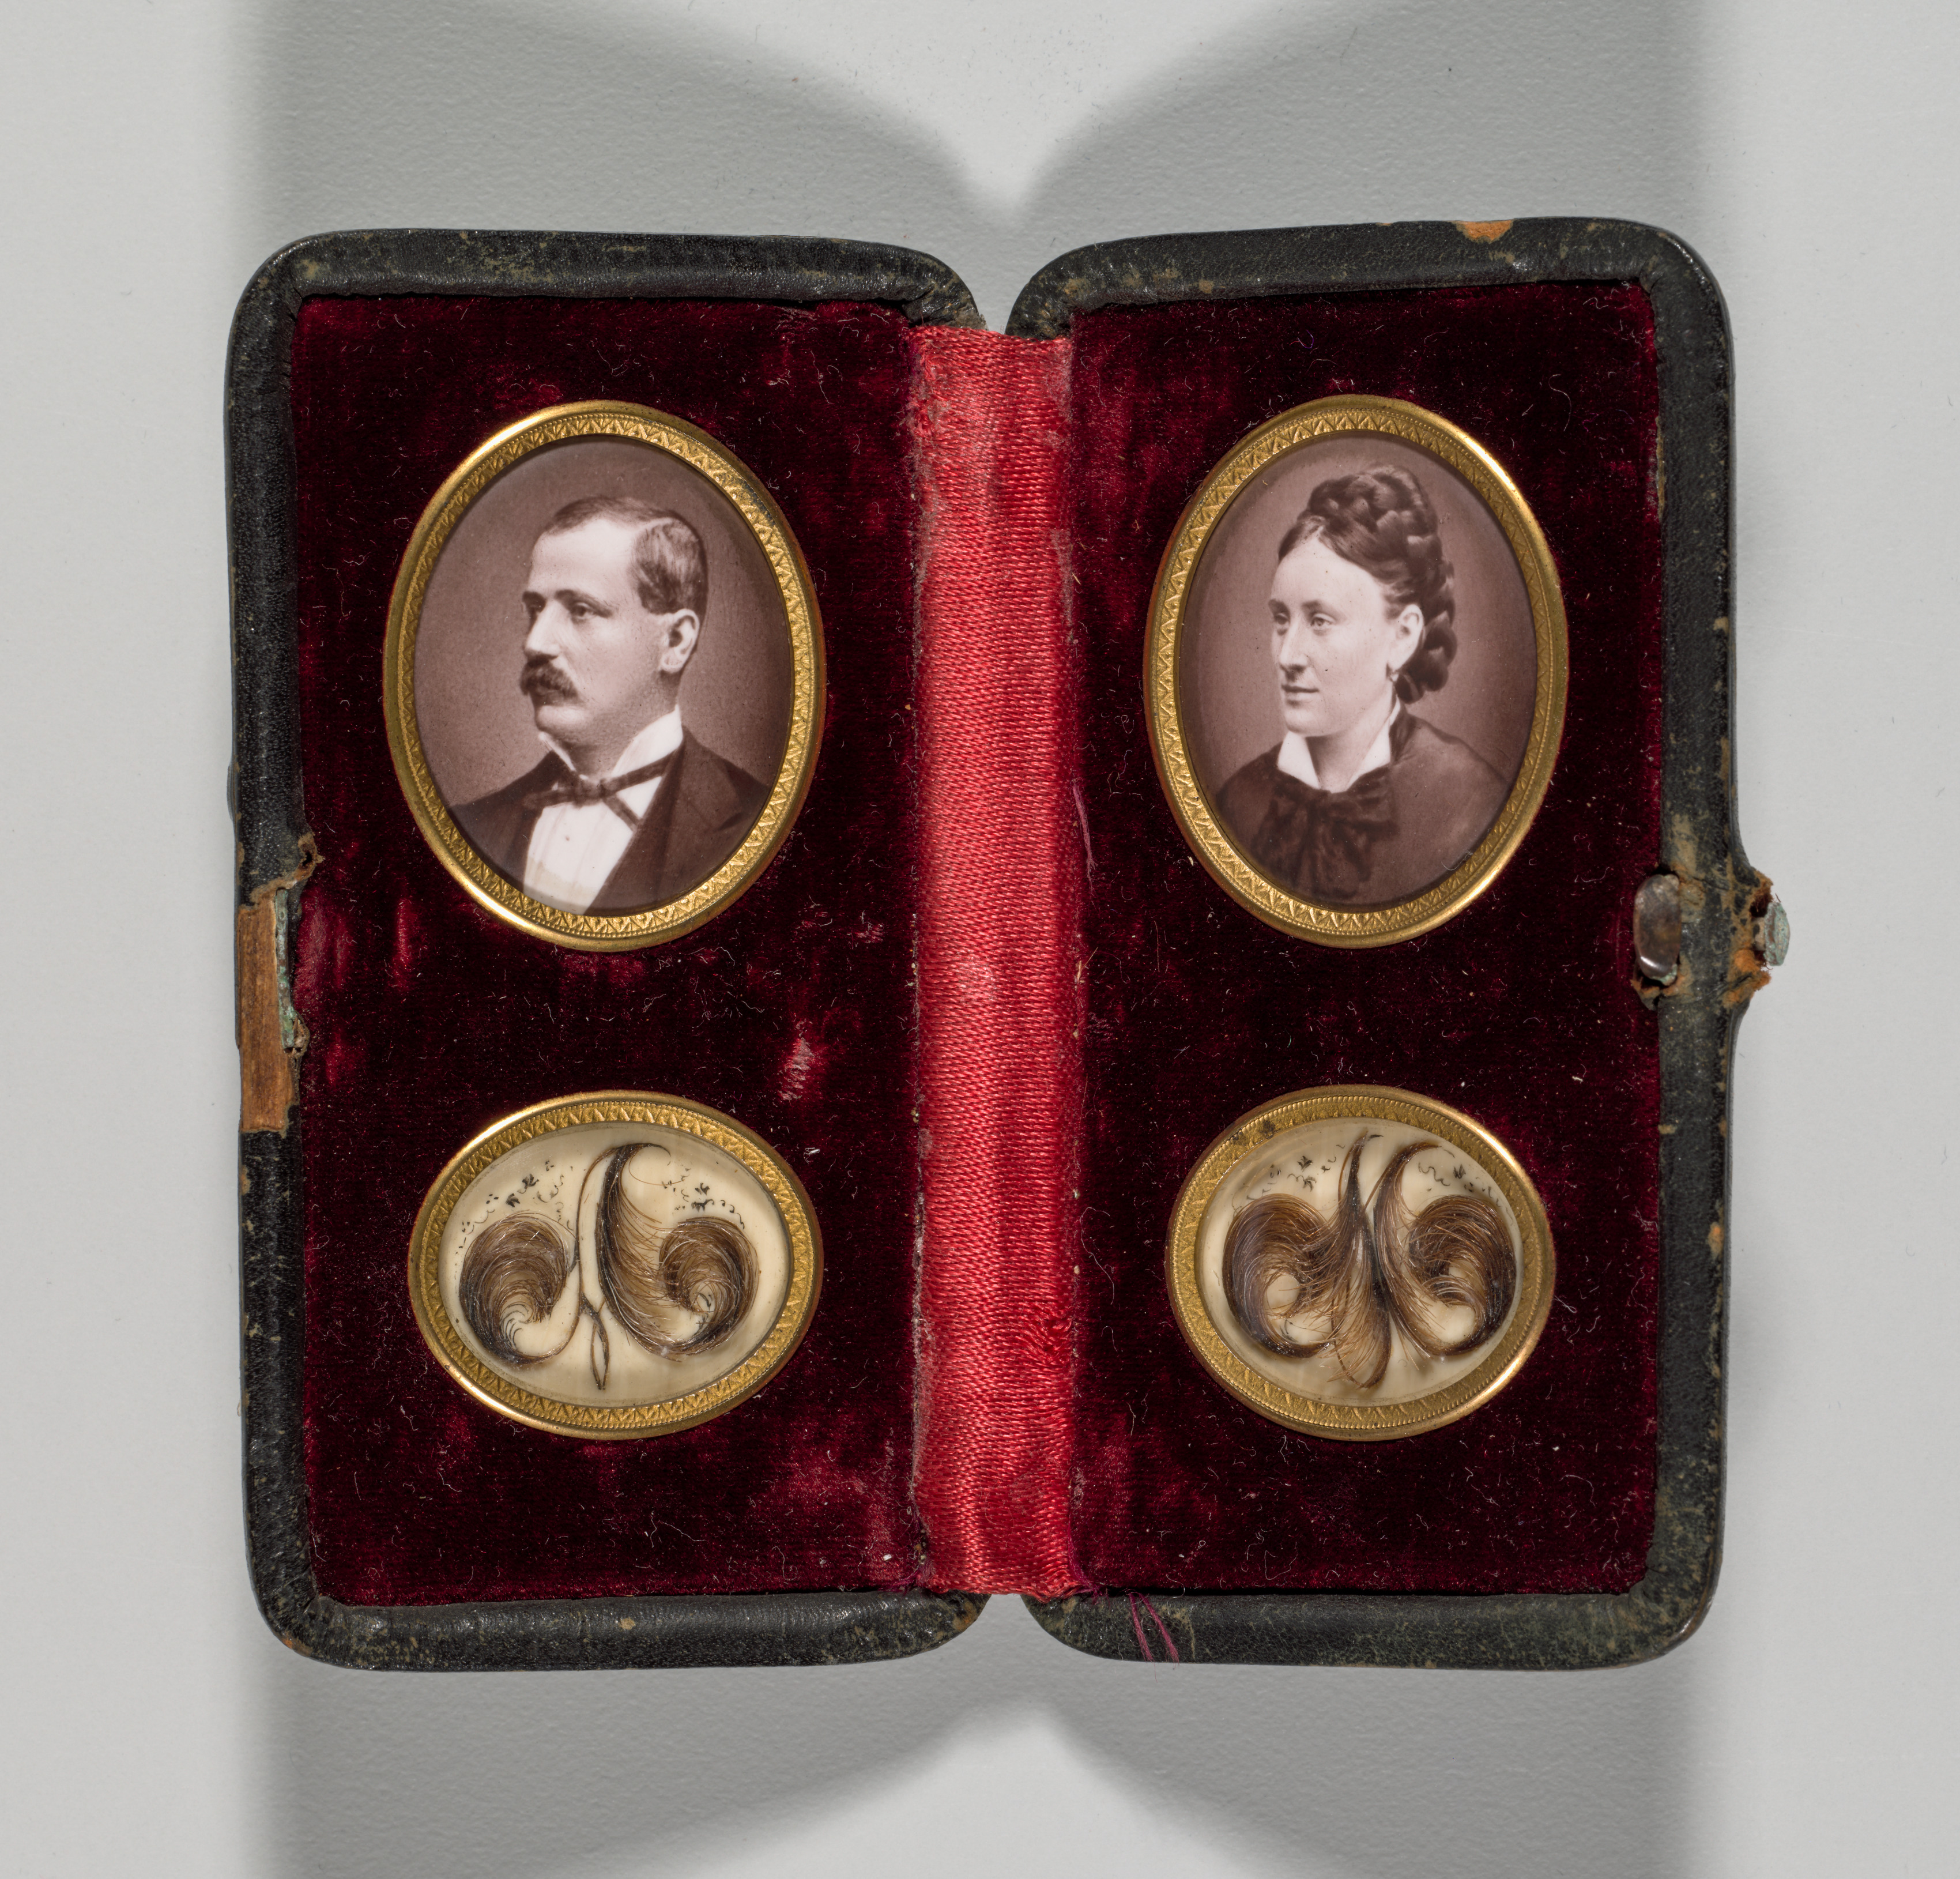 Untitled (Case with portraits of a man and woman and hair ornaments)